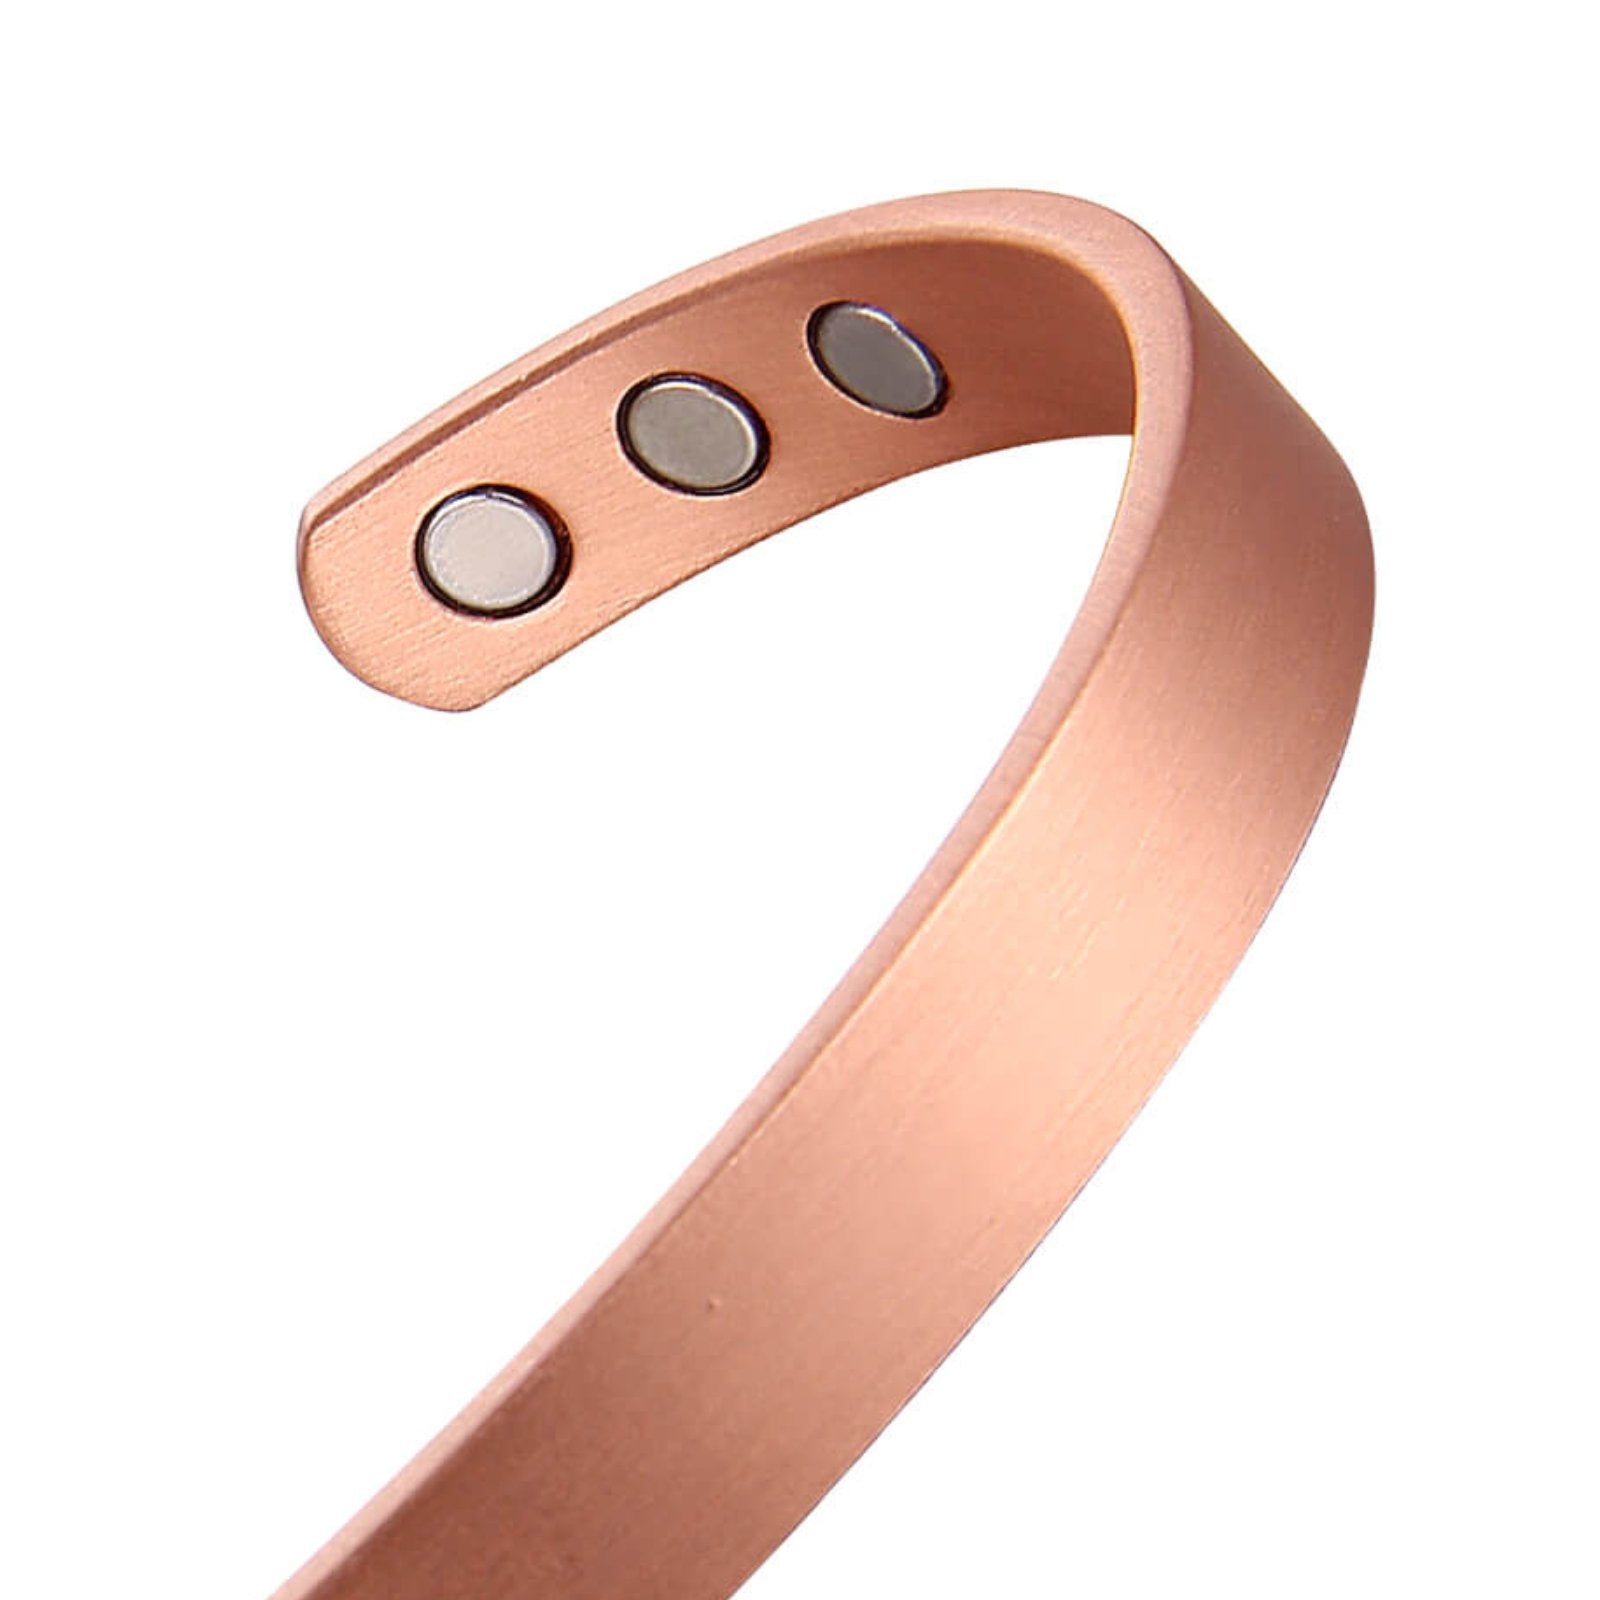 Copper Bracelet for Arthritis - GUARANTEED 99.9 PURE Copper Magnetic  Bracelet For Men Women With 6 Powerful Magnets For Effective Natural Relief  Of Joint Pain Arthritis RSI Carpal Tunnel 1 Bracelet :